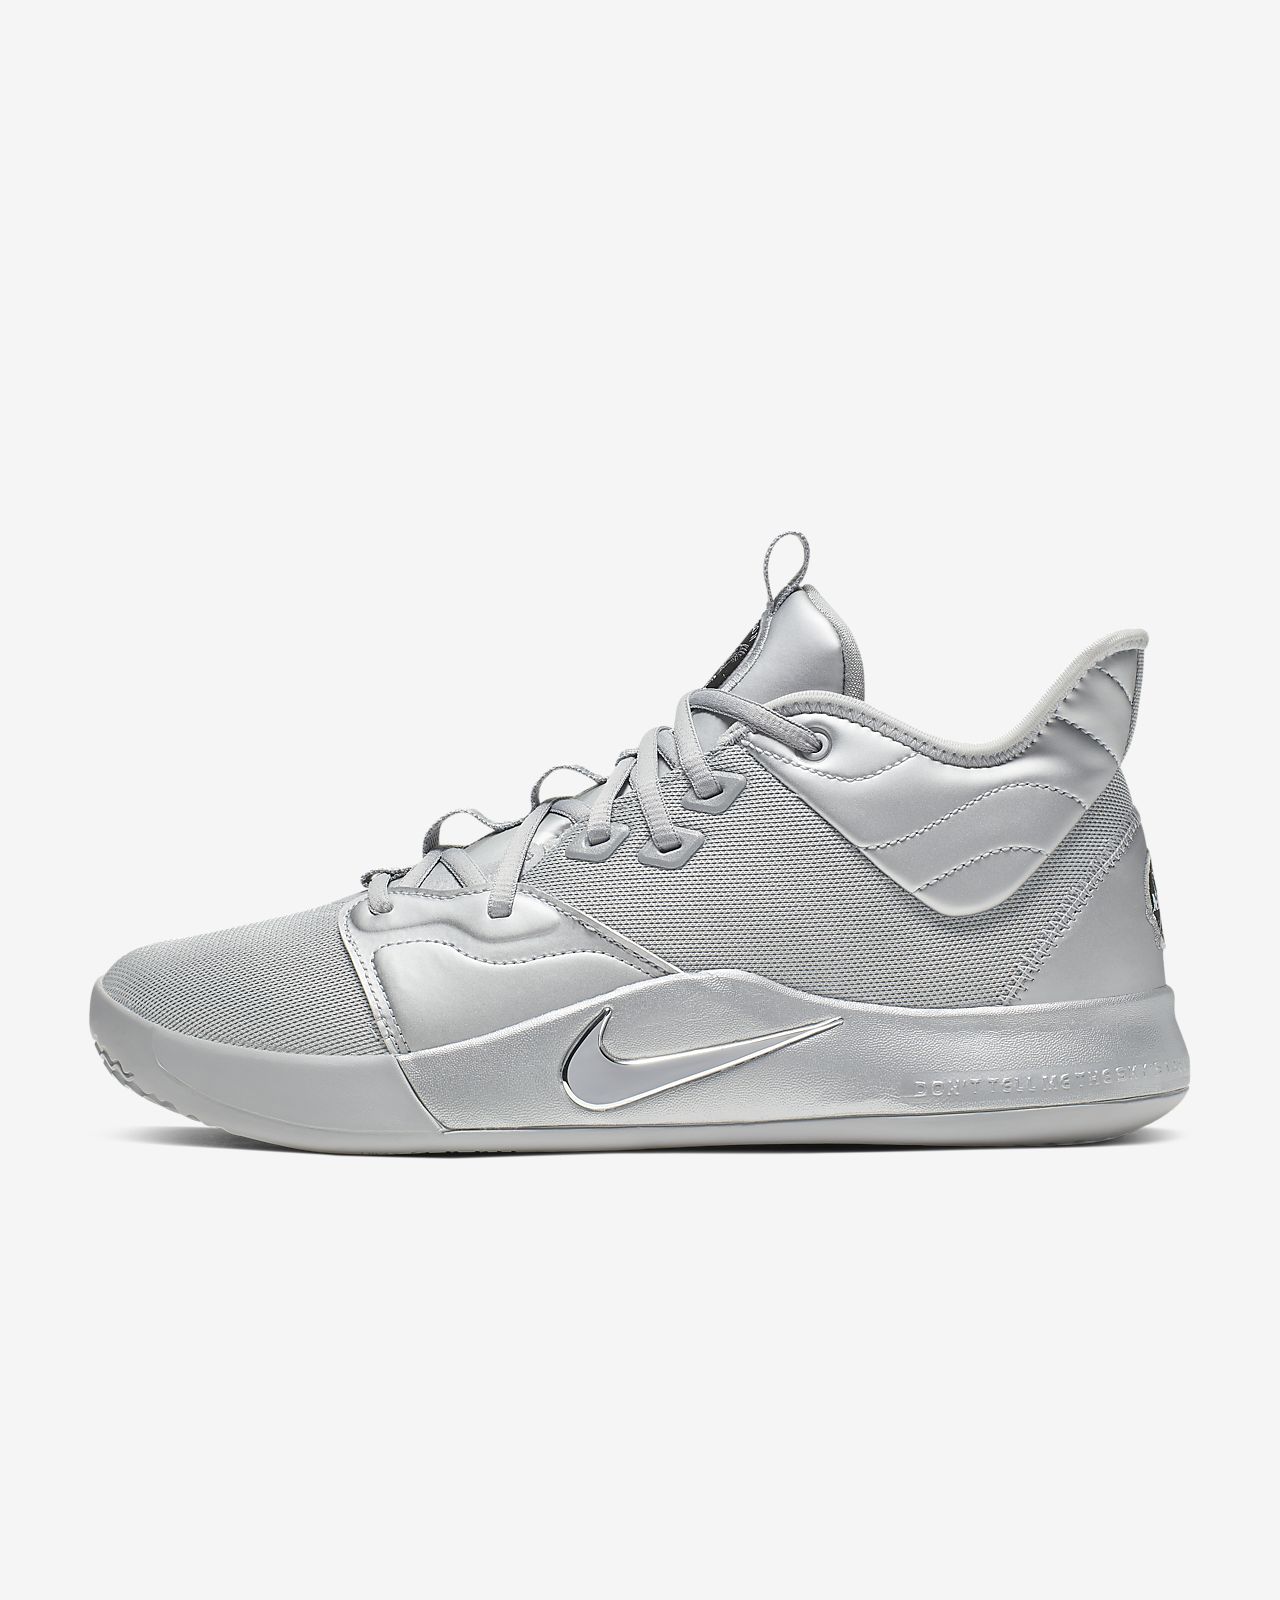 nasa pg 13 shoes Kevin Durant shoes on sale